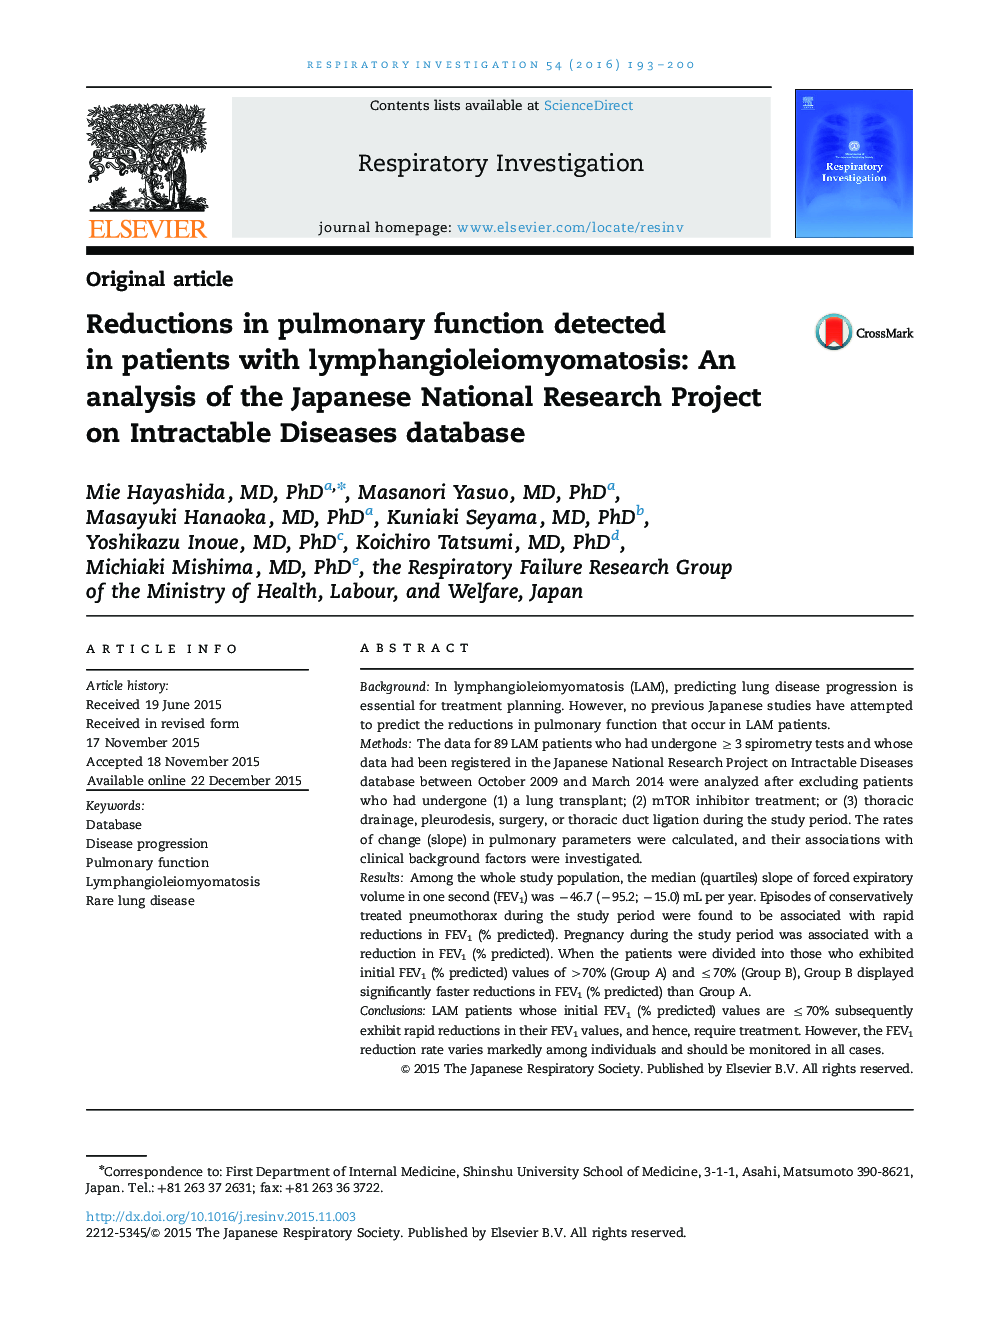 Reductions in pulmonary function detected in patients with lymphangioleiomyomatosis: An analysis of the Japanese National Research Project on Intractable Diseases database